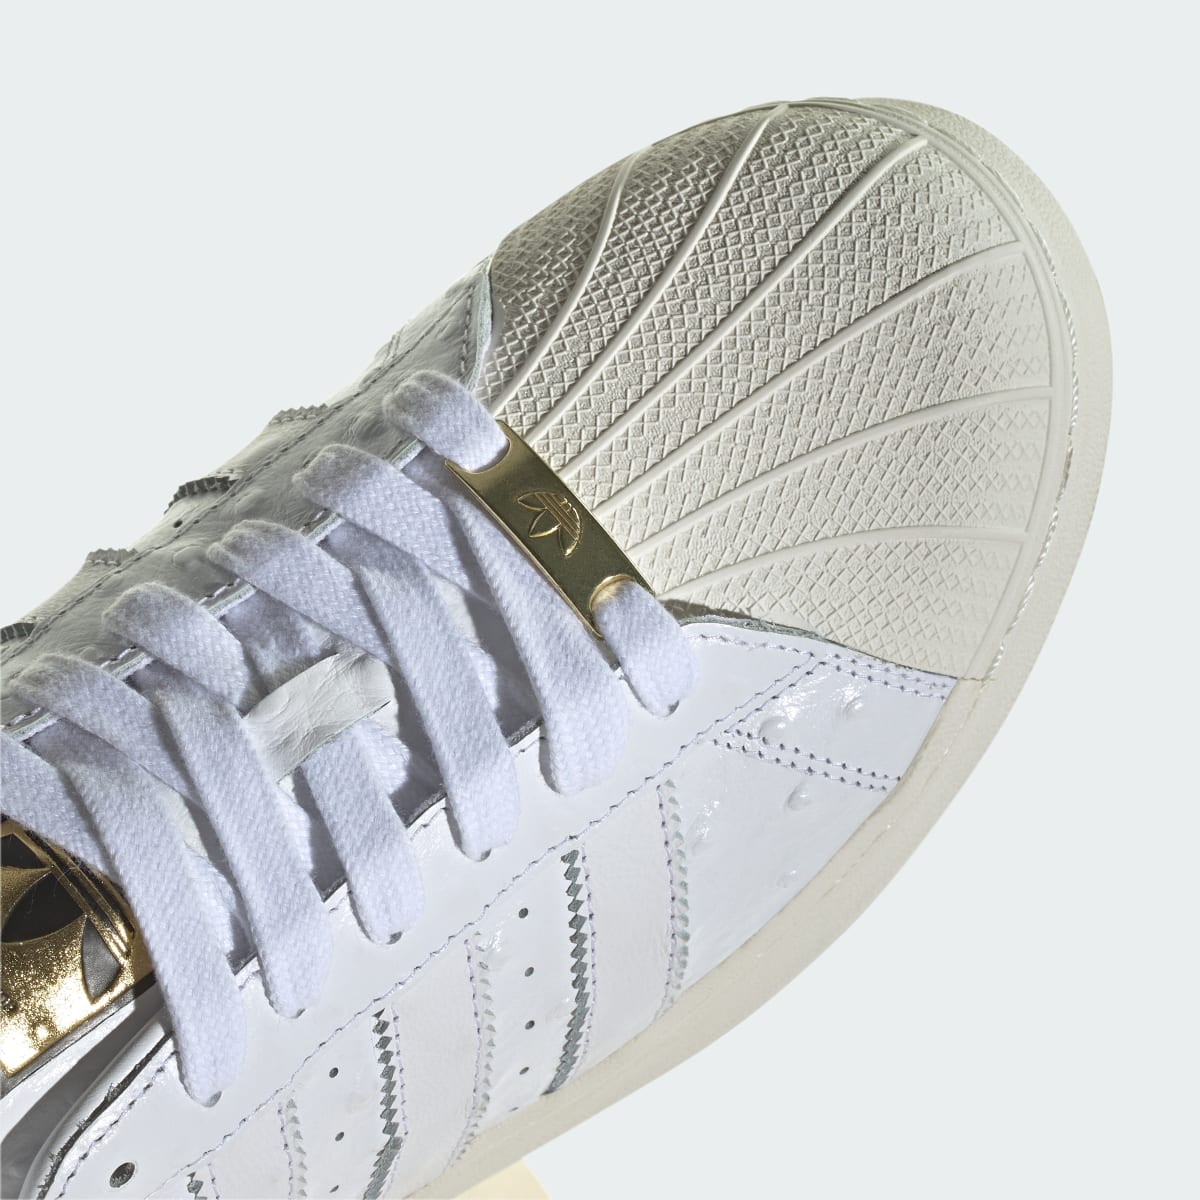 Adidas Superstar XLG Shoes. 11